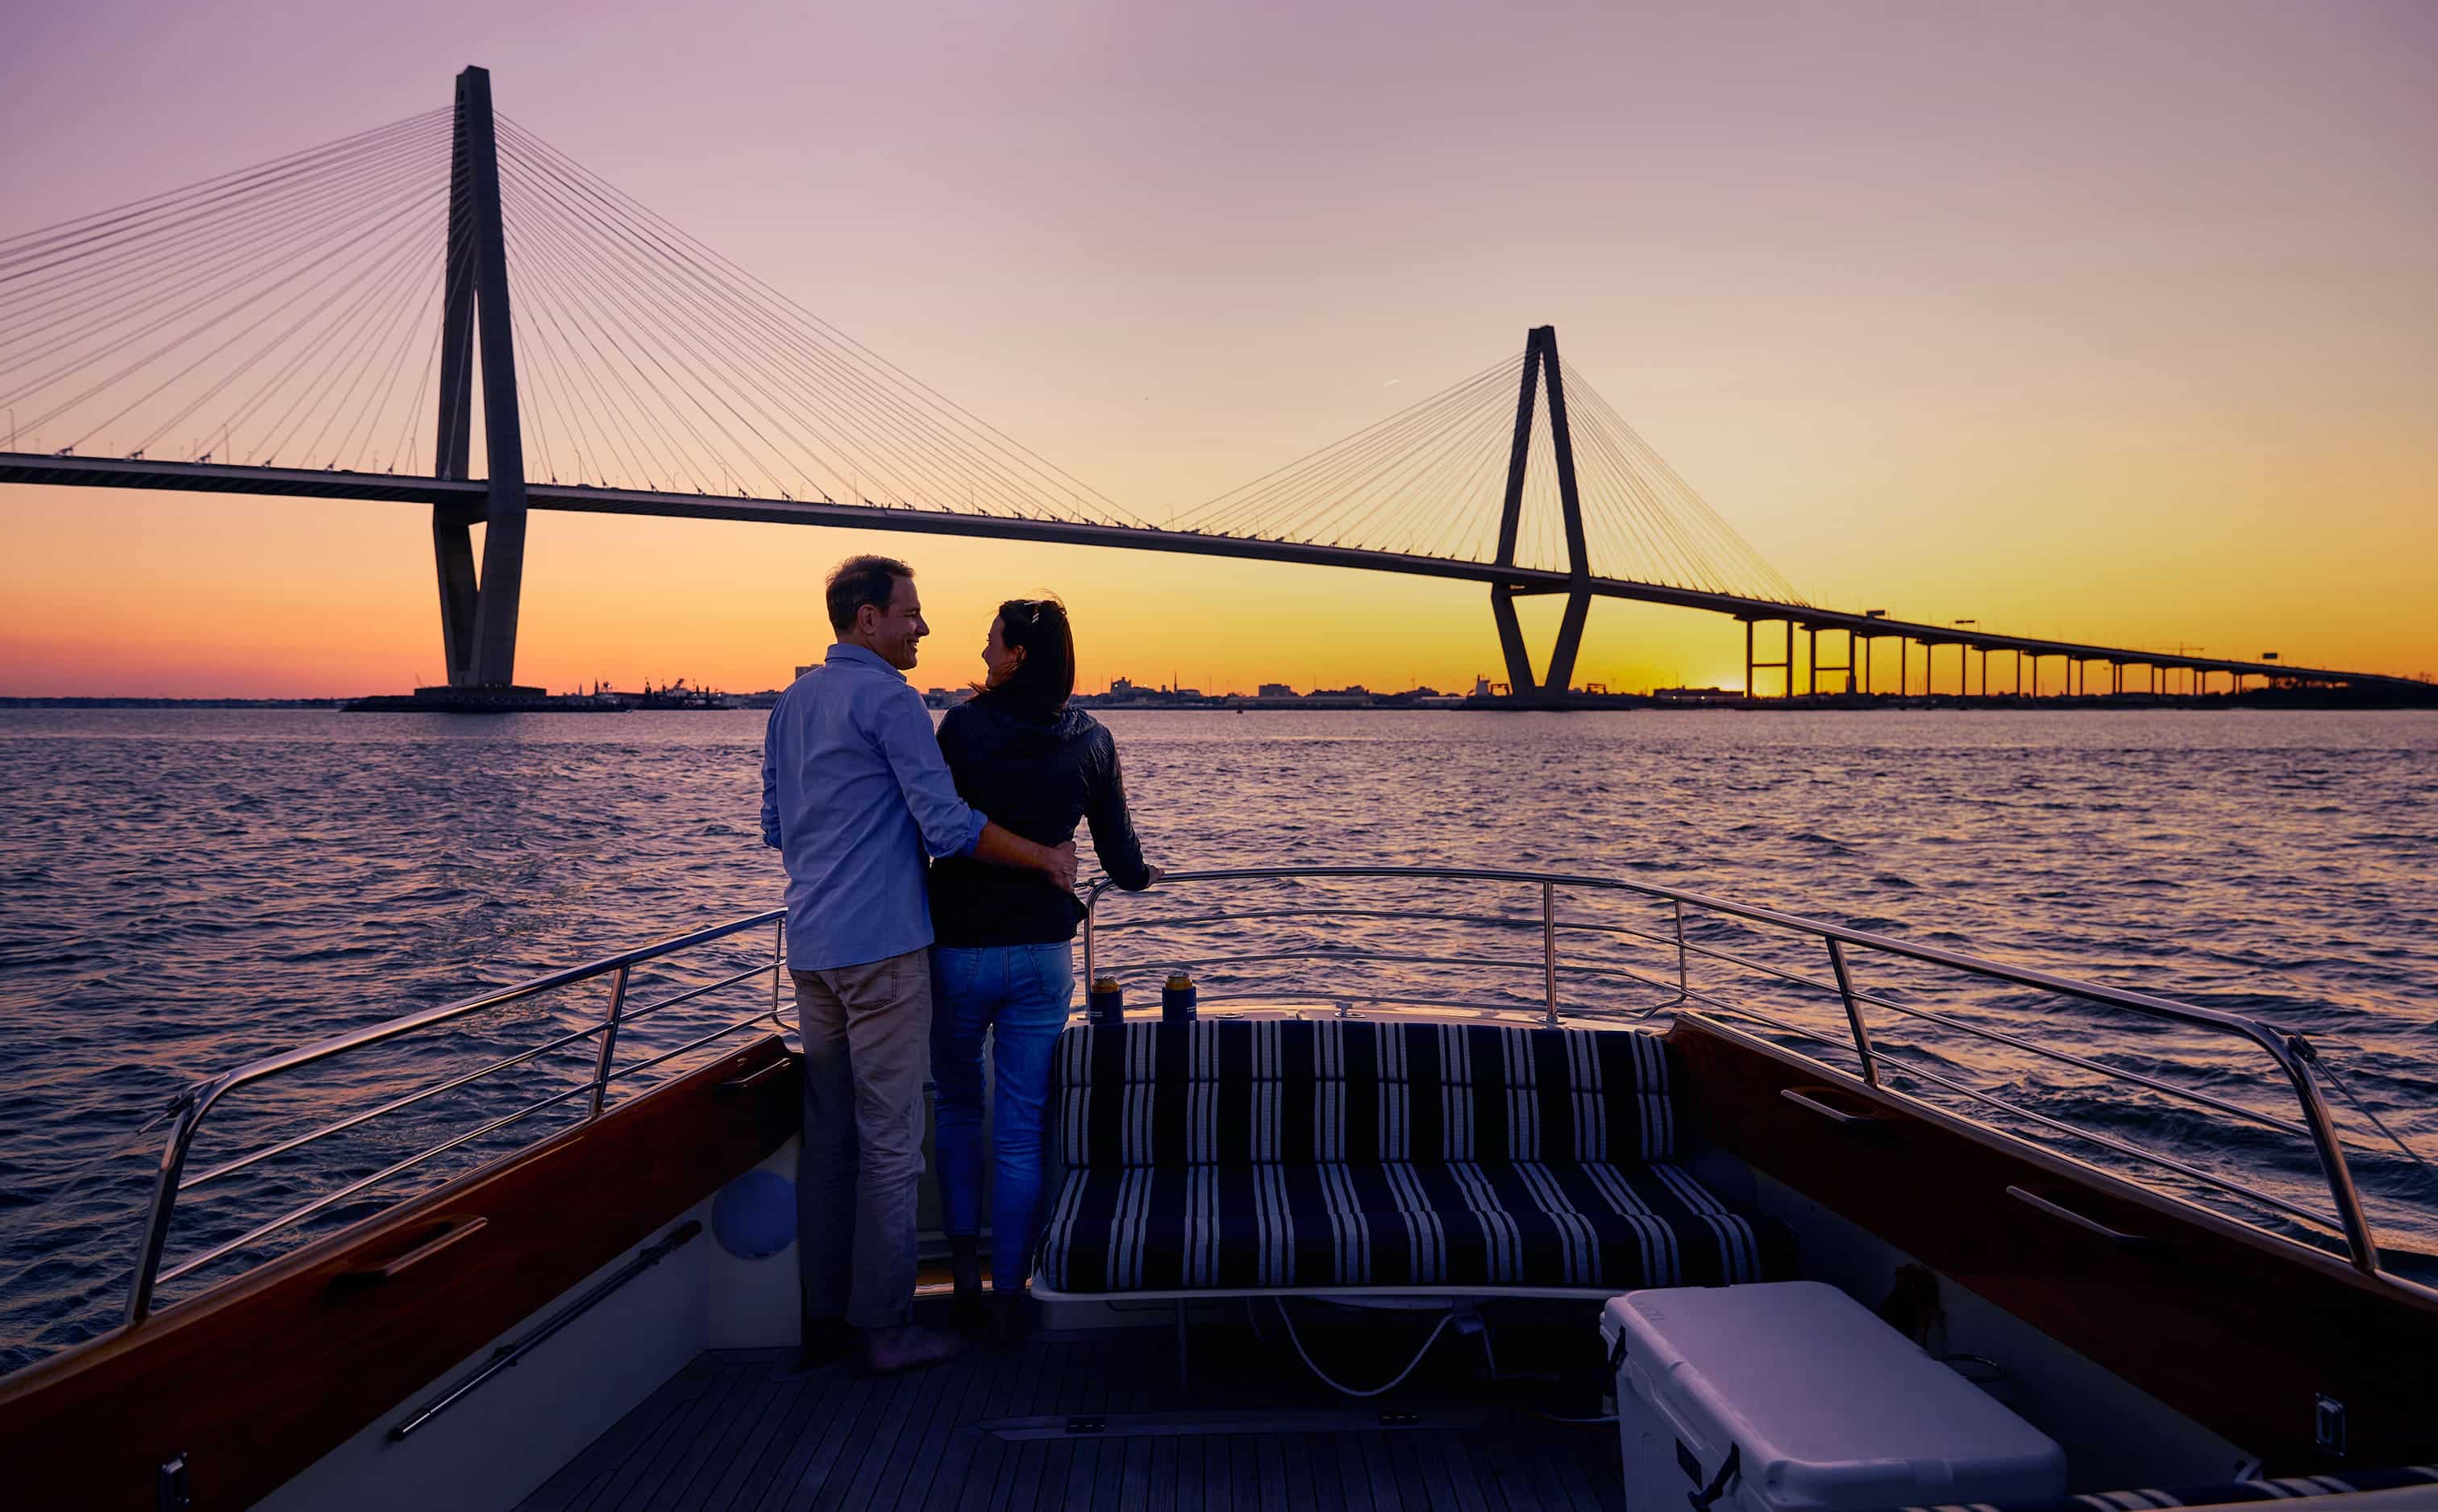 couple on boat at sunset with bridge in the background